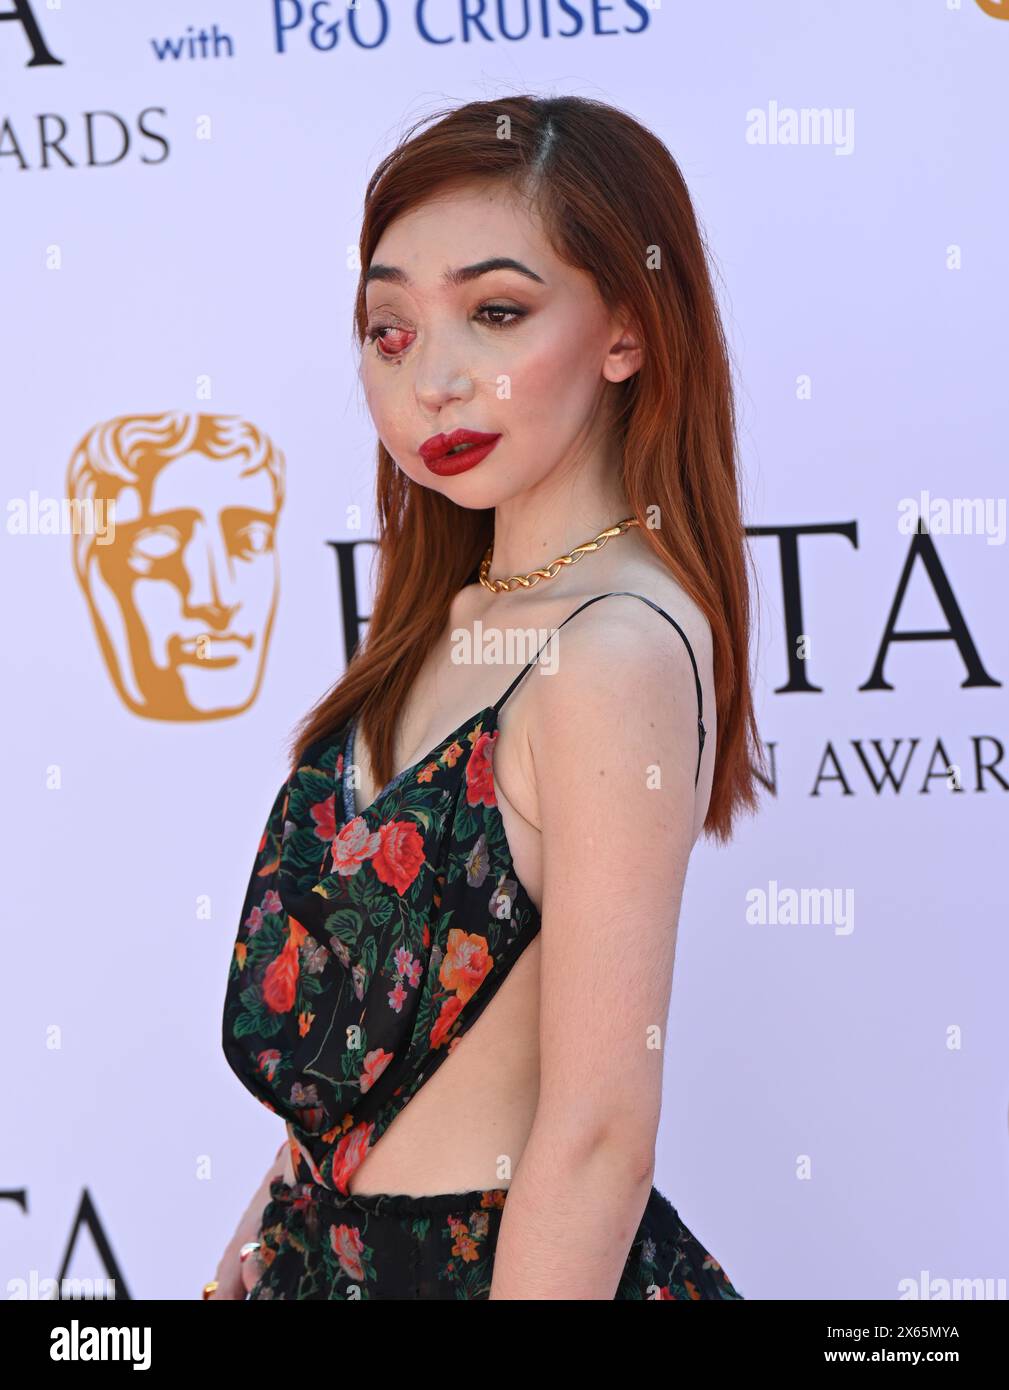 LONDON, ENGLAND - MAY 12: Nikki Lilly attends the BAFTA Television Awards 2024 with P&O Cruises at The Royal Festival Hall in London, England. Credit: See Li/Picture Capital/Alamy Live News Stock Photo